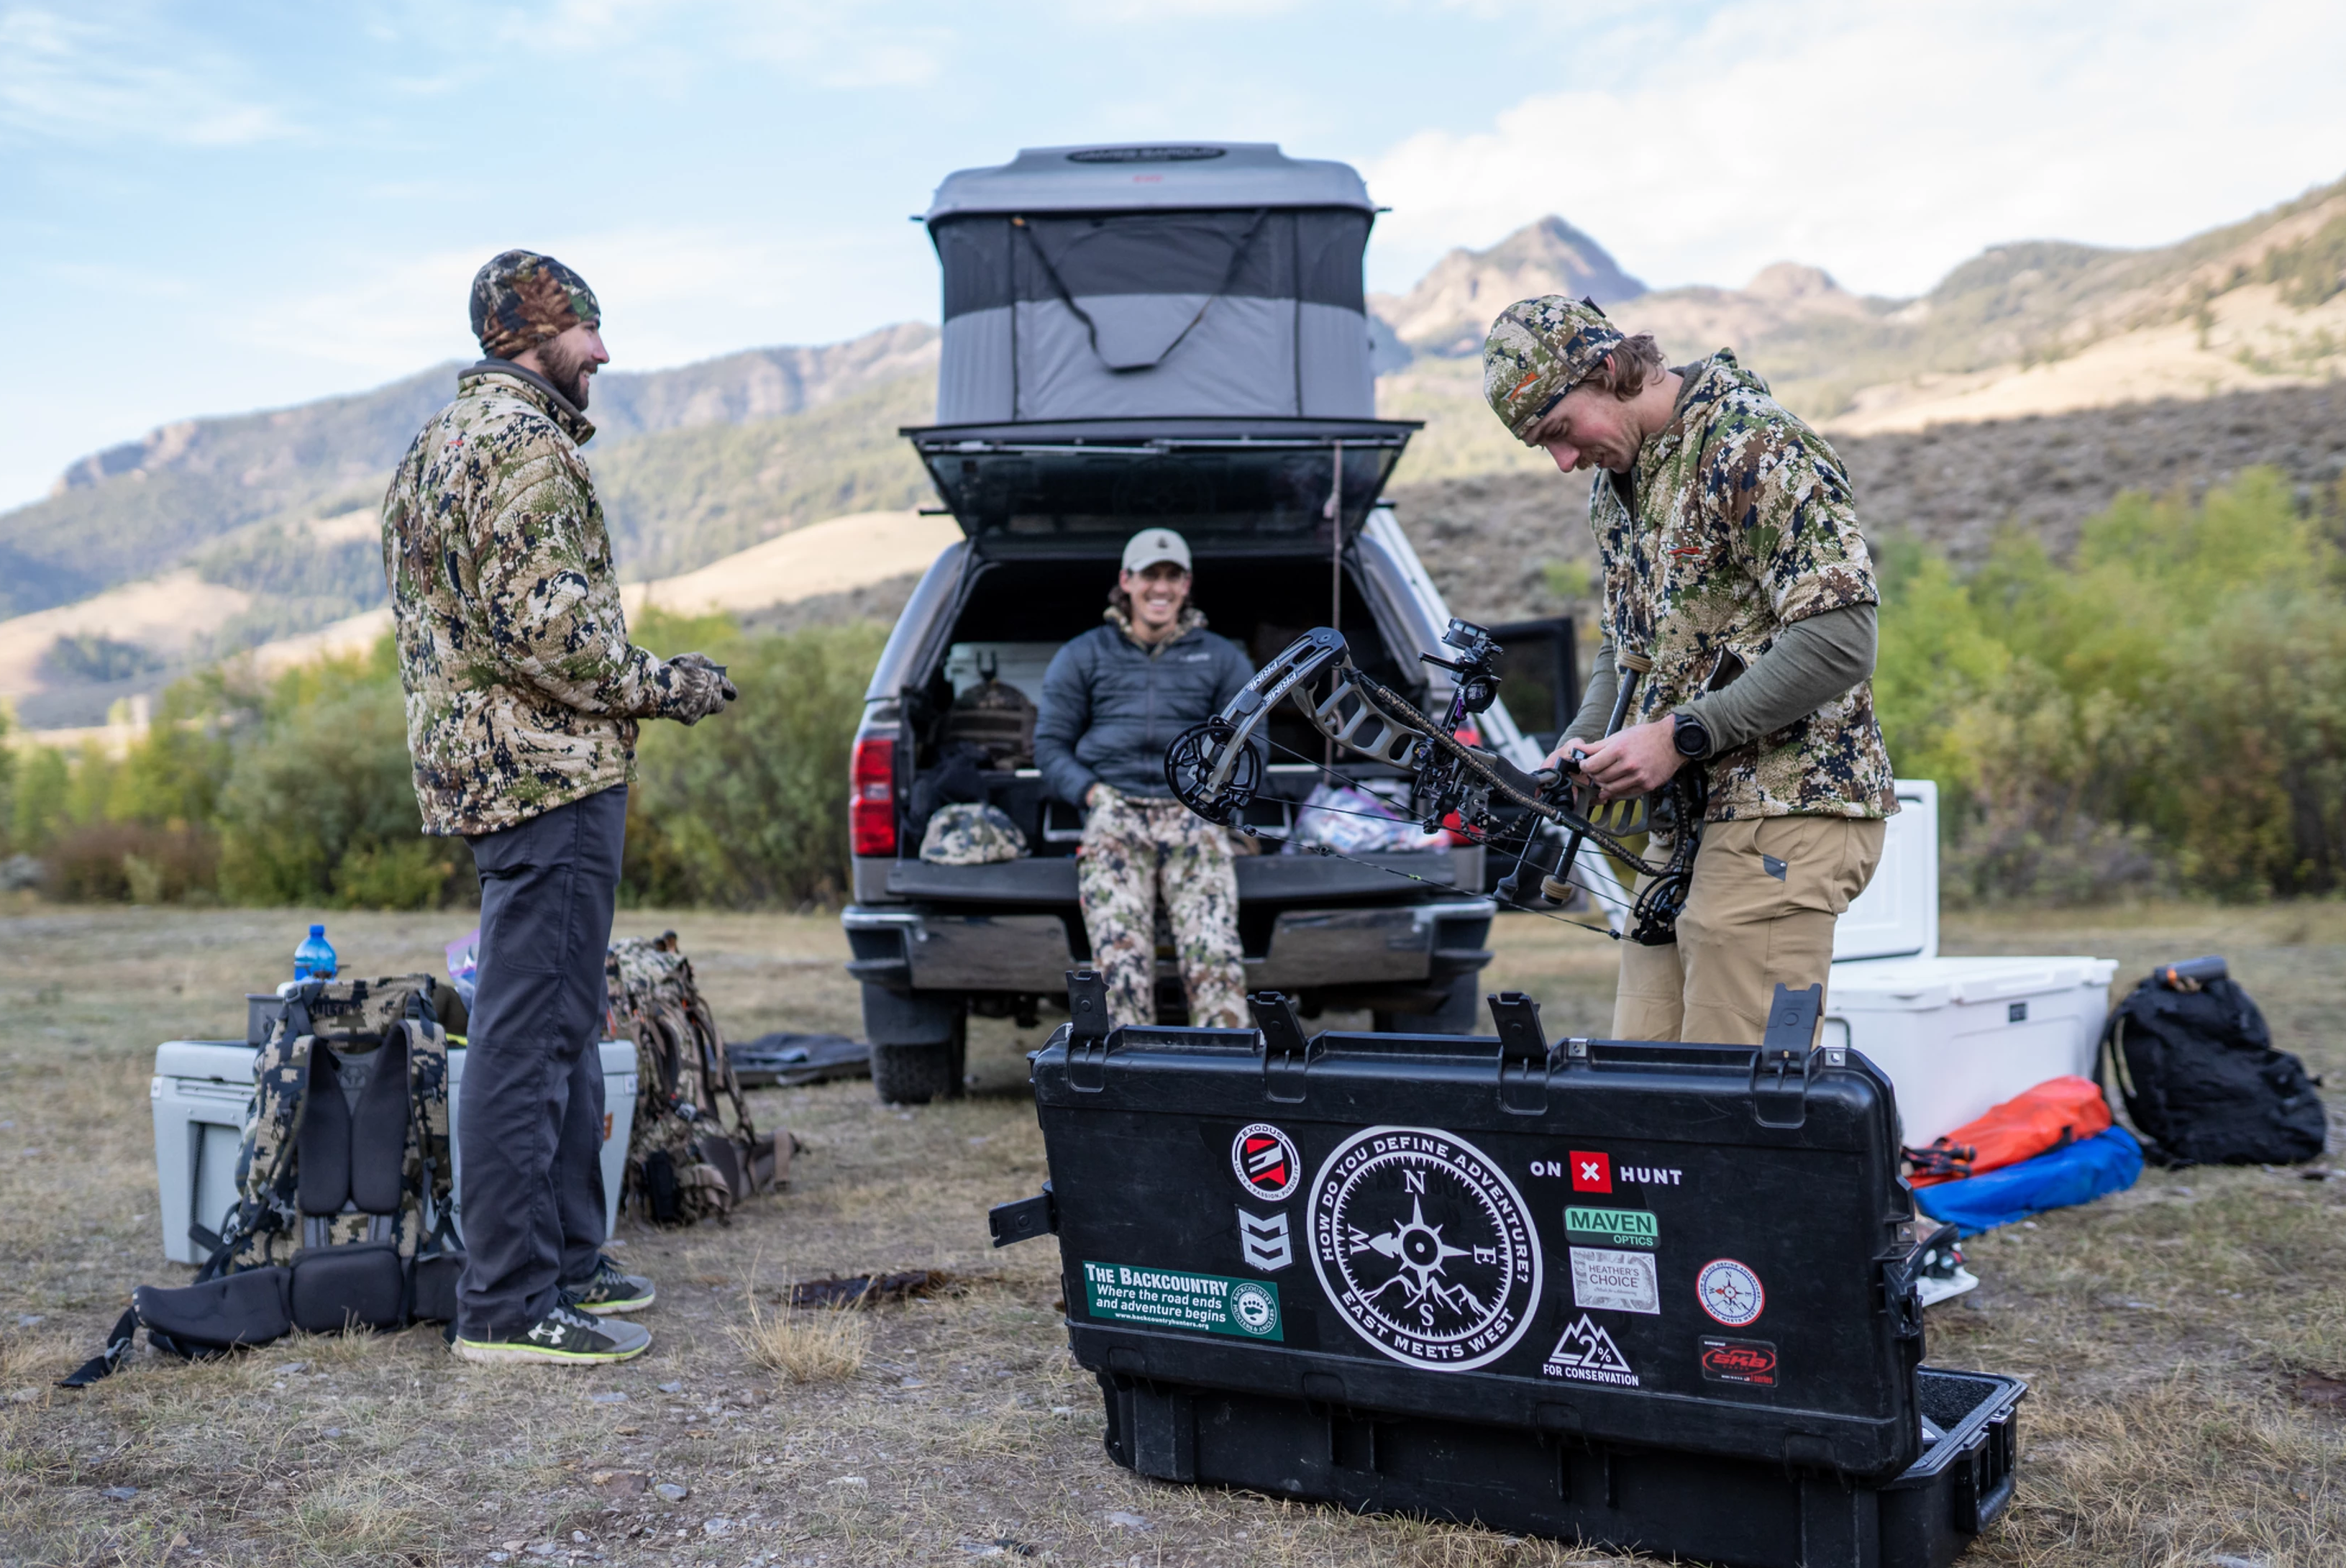 OVERLAND GEAR LIST FOR HUNTING TRIPS